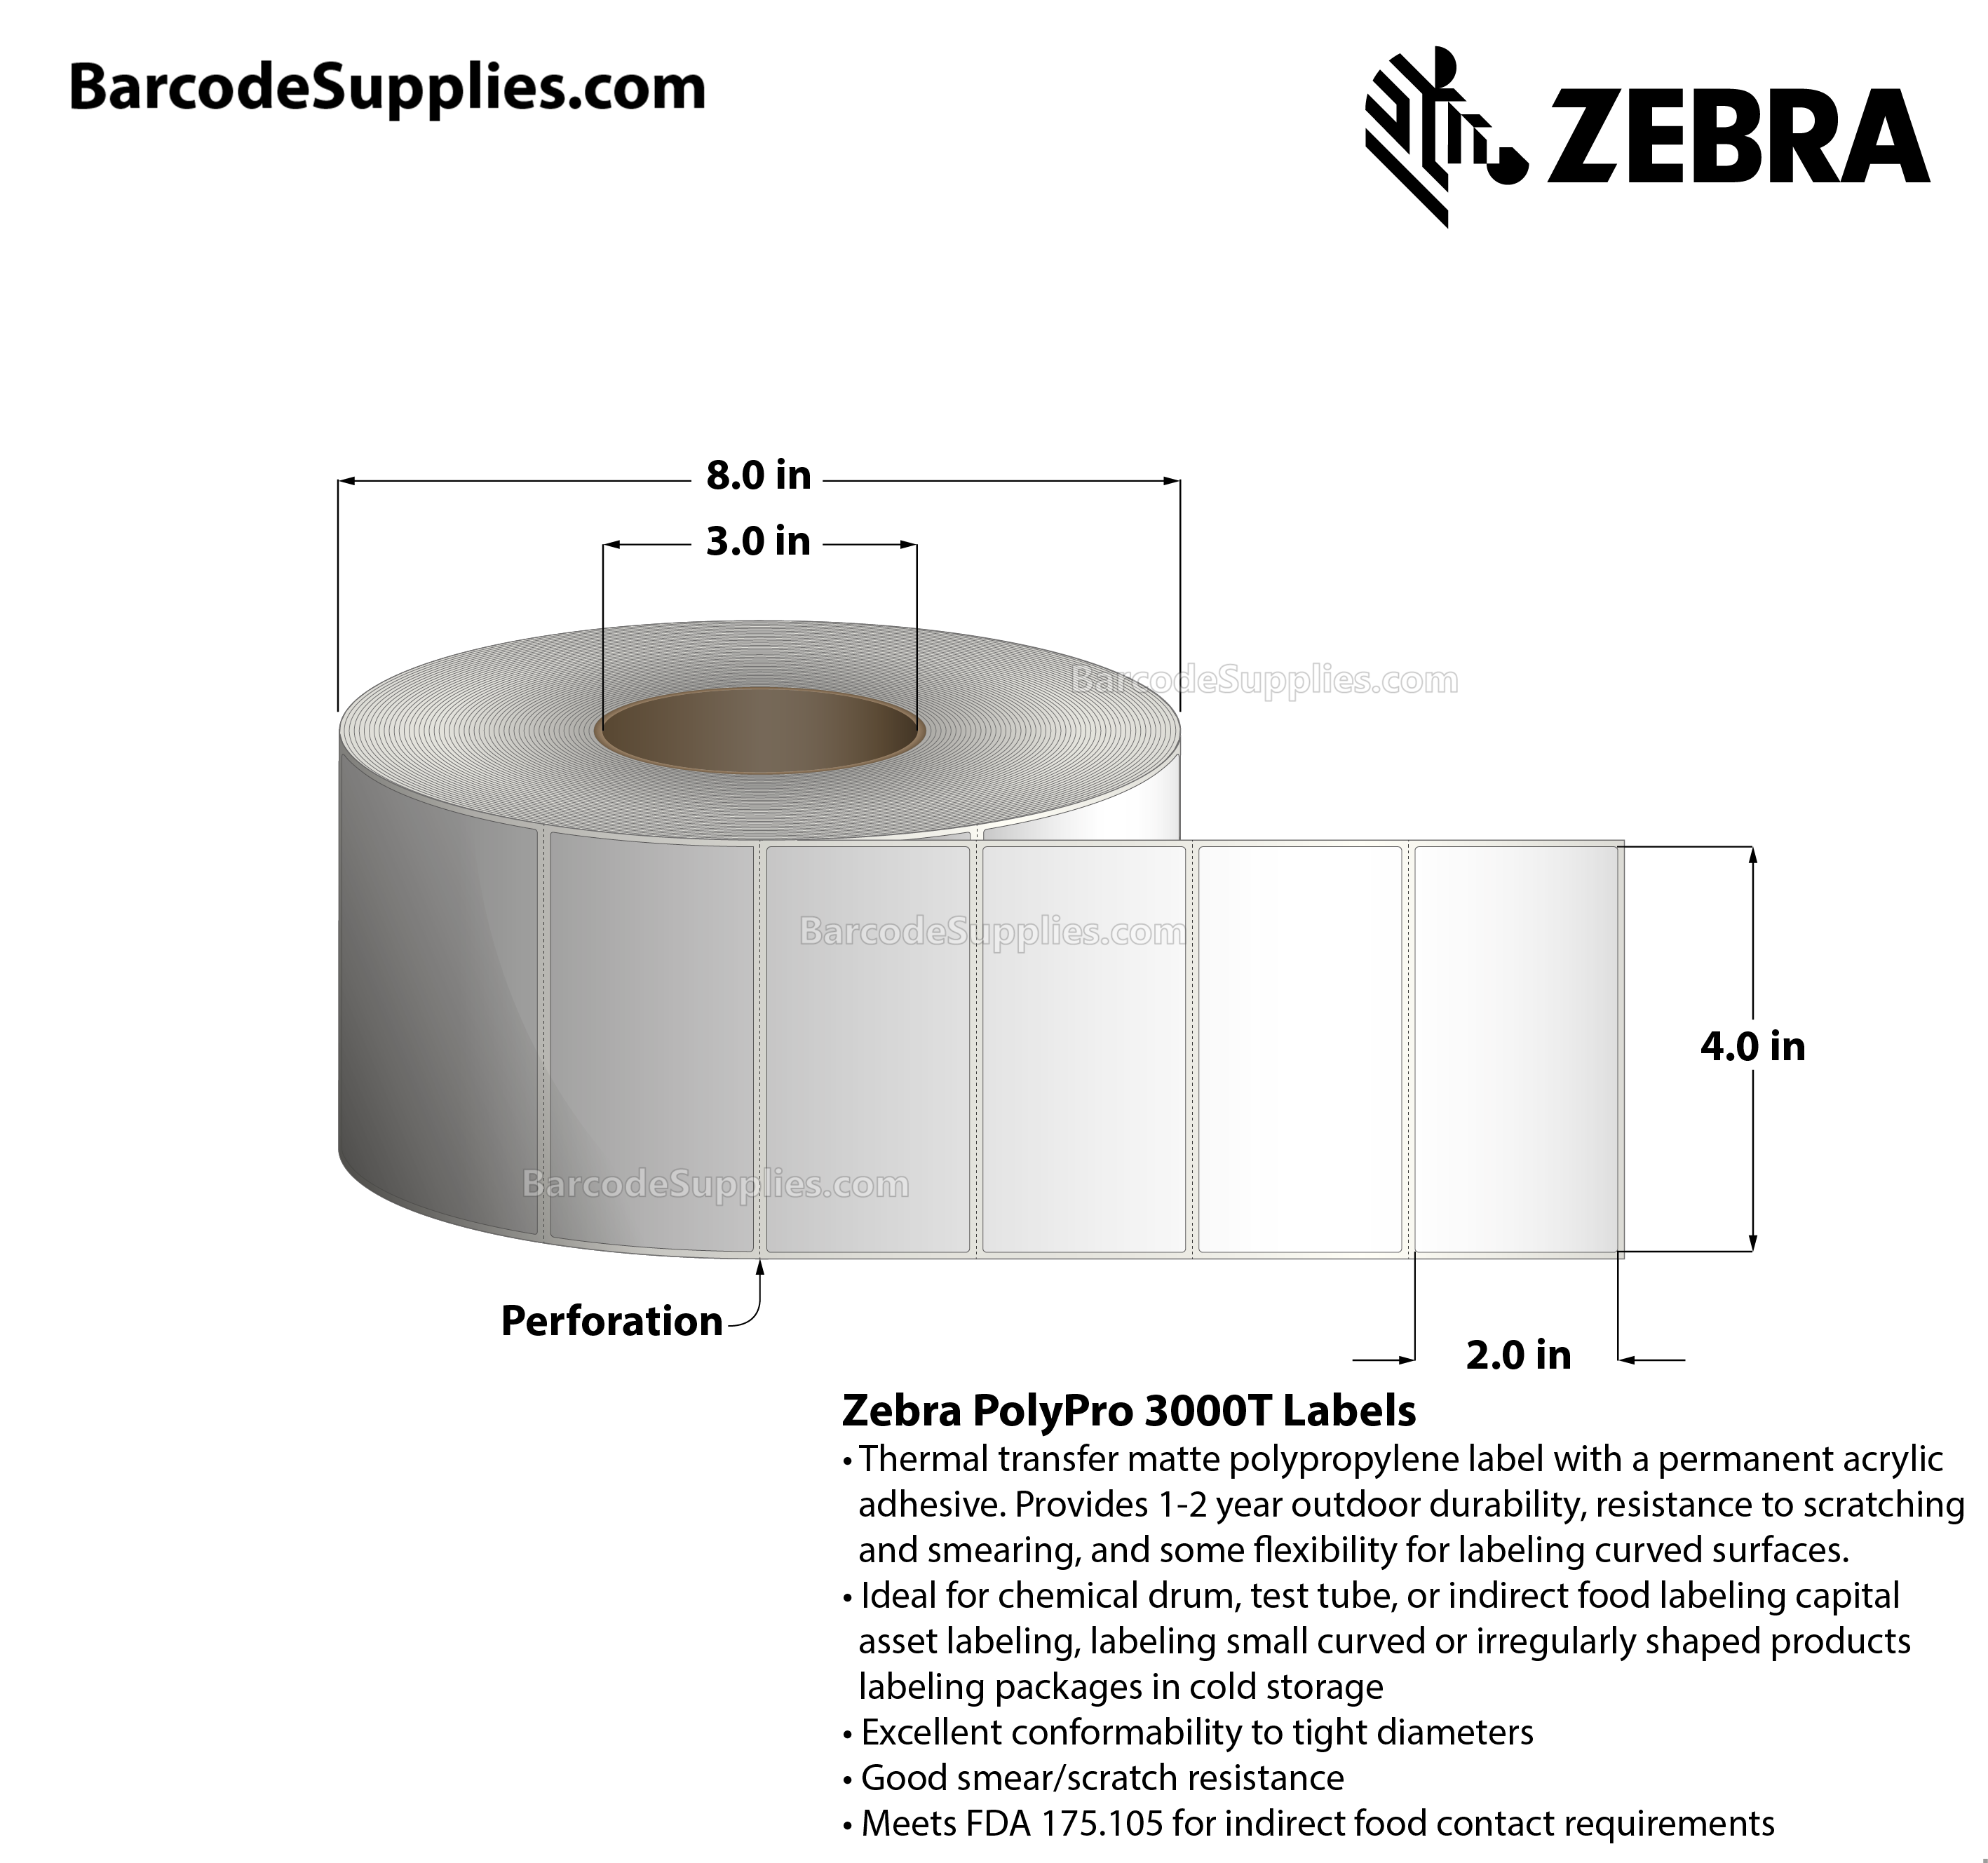 4 x 2 Thermal Transfer White PolyPro 3000T Labels With Permanent Adhesive - Perforated - 2441 Labels Per Roll - Carton Of 4 Rolls - 9764 Labels Total - MPN: 10011994